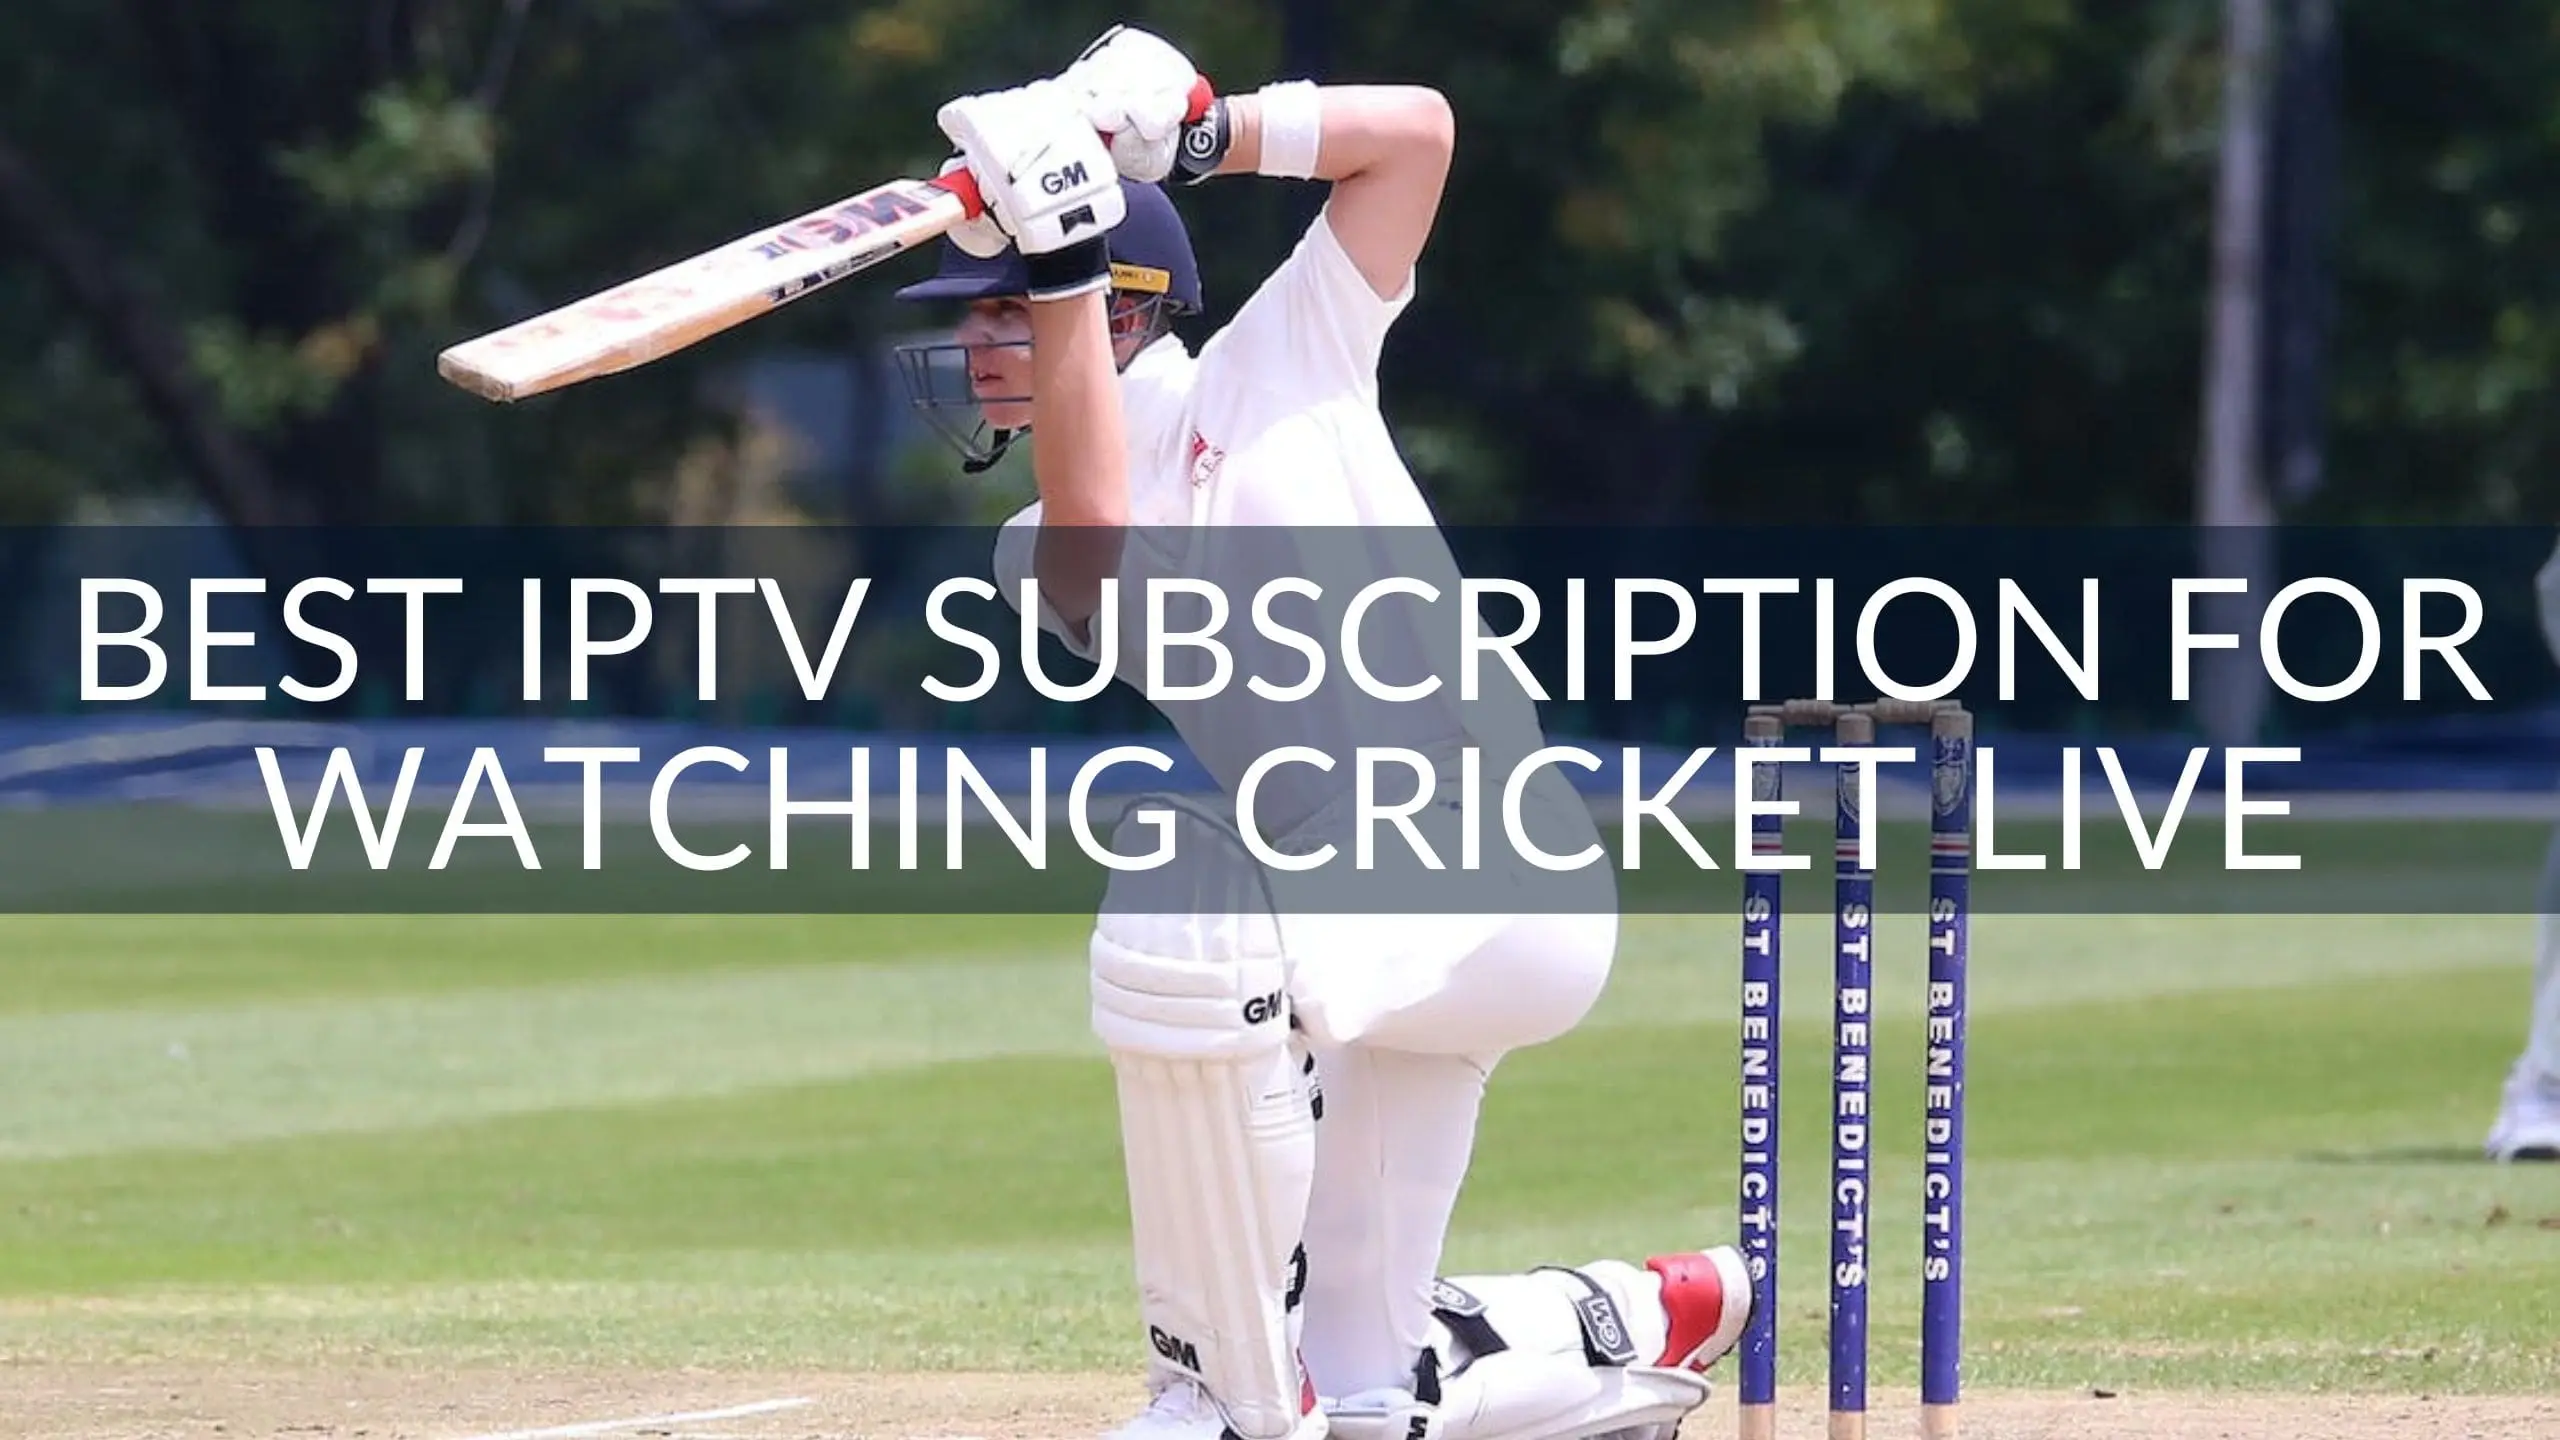 Best IPTV subscription for watching cricket Live